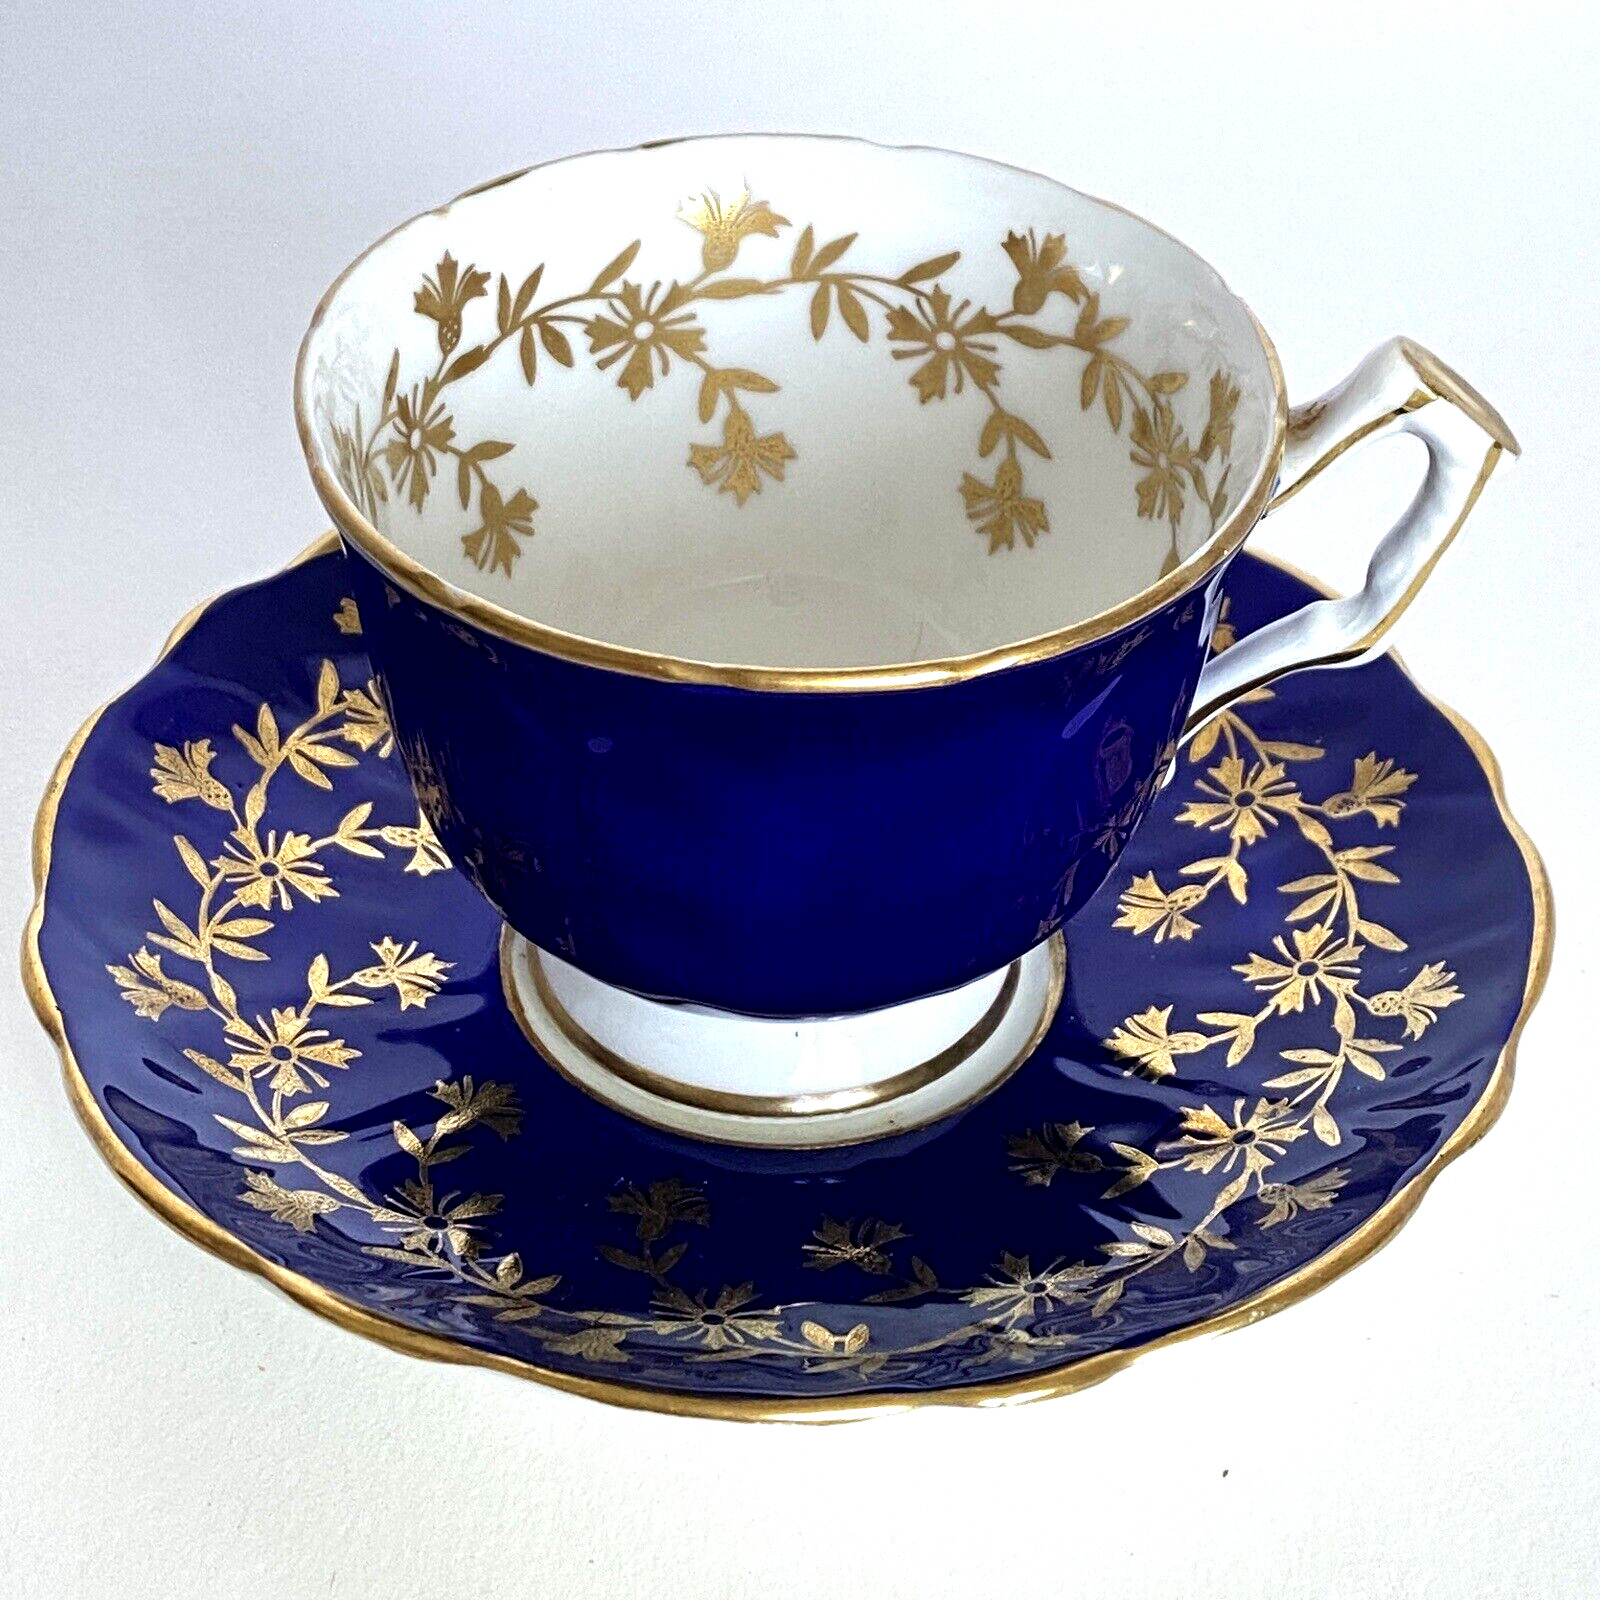 Aynsley Deep Blue No28 Scalloped Border Gold Accent Floral Thistle Teacup Saucer